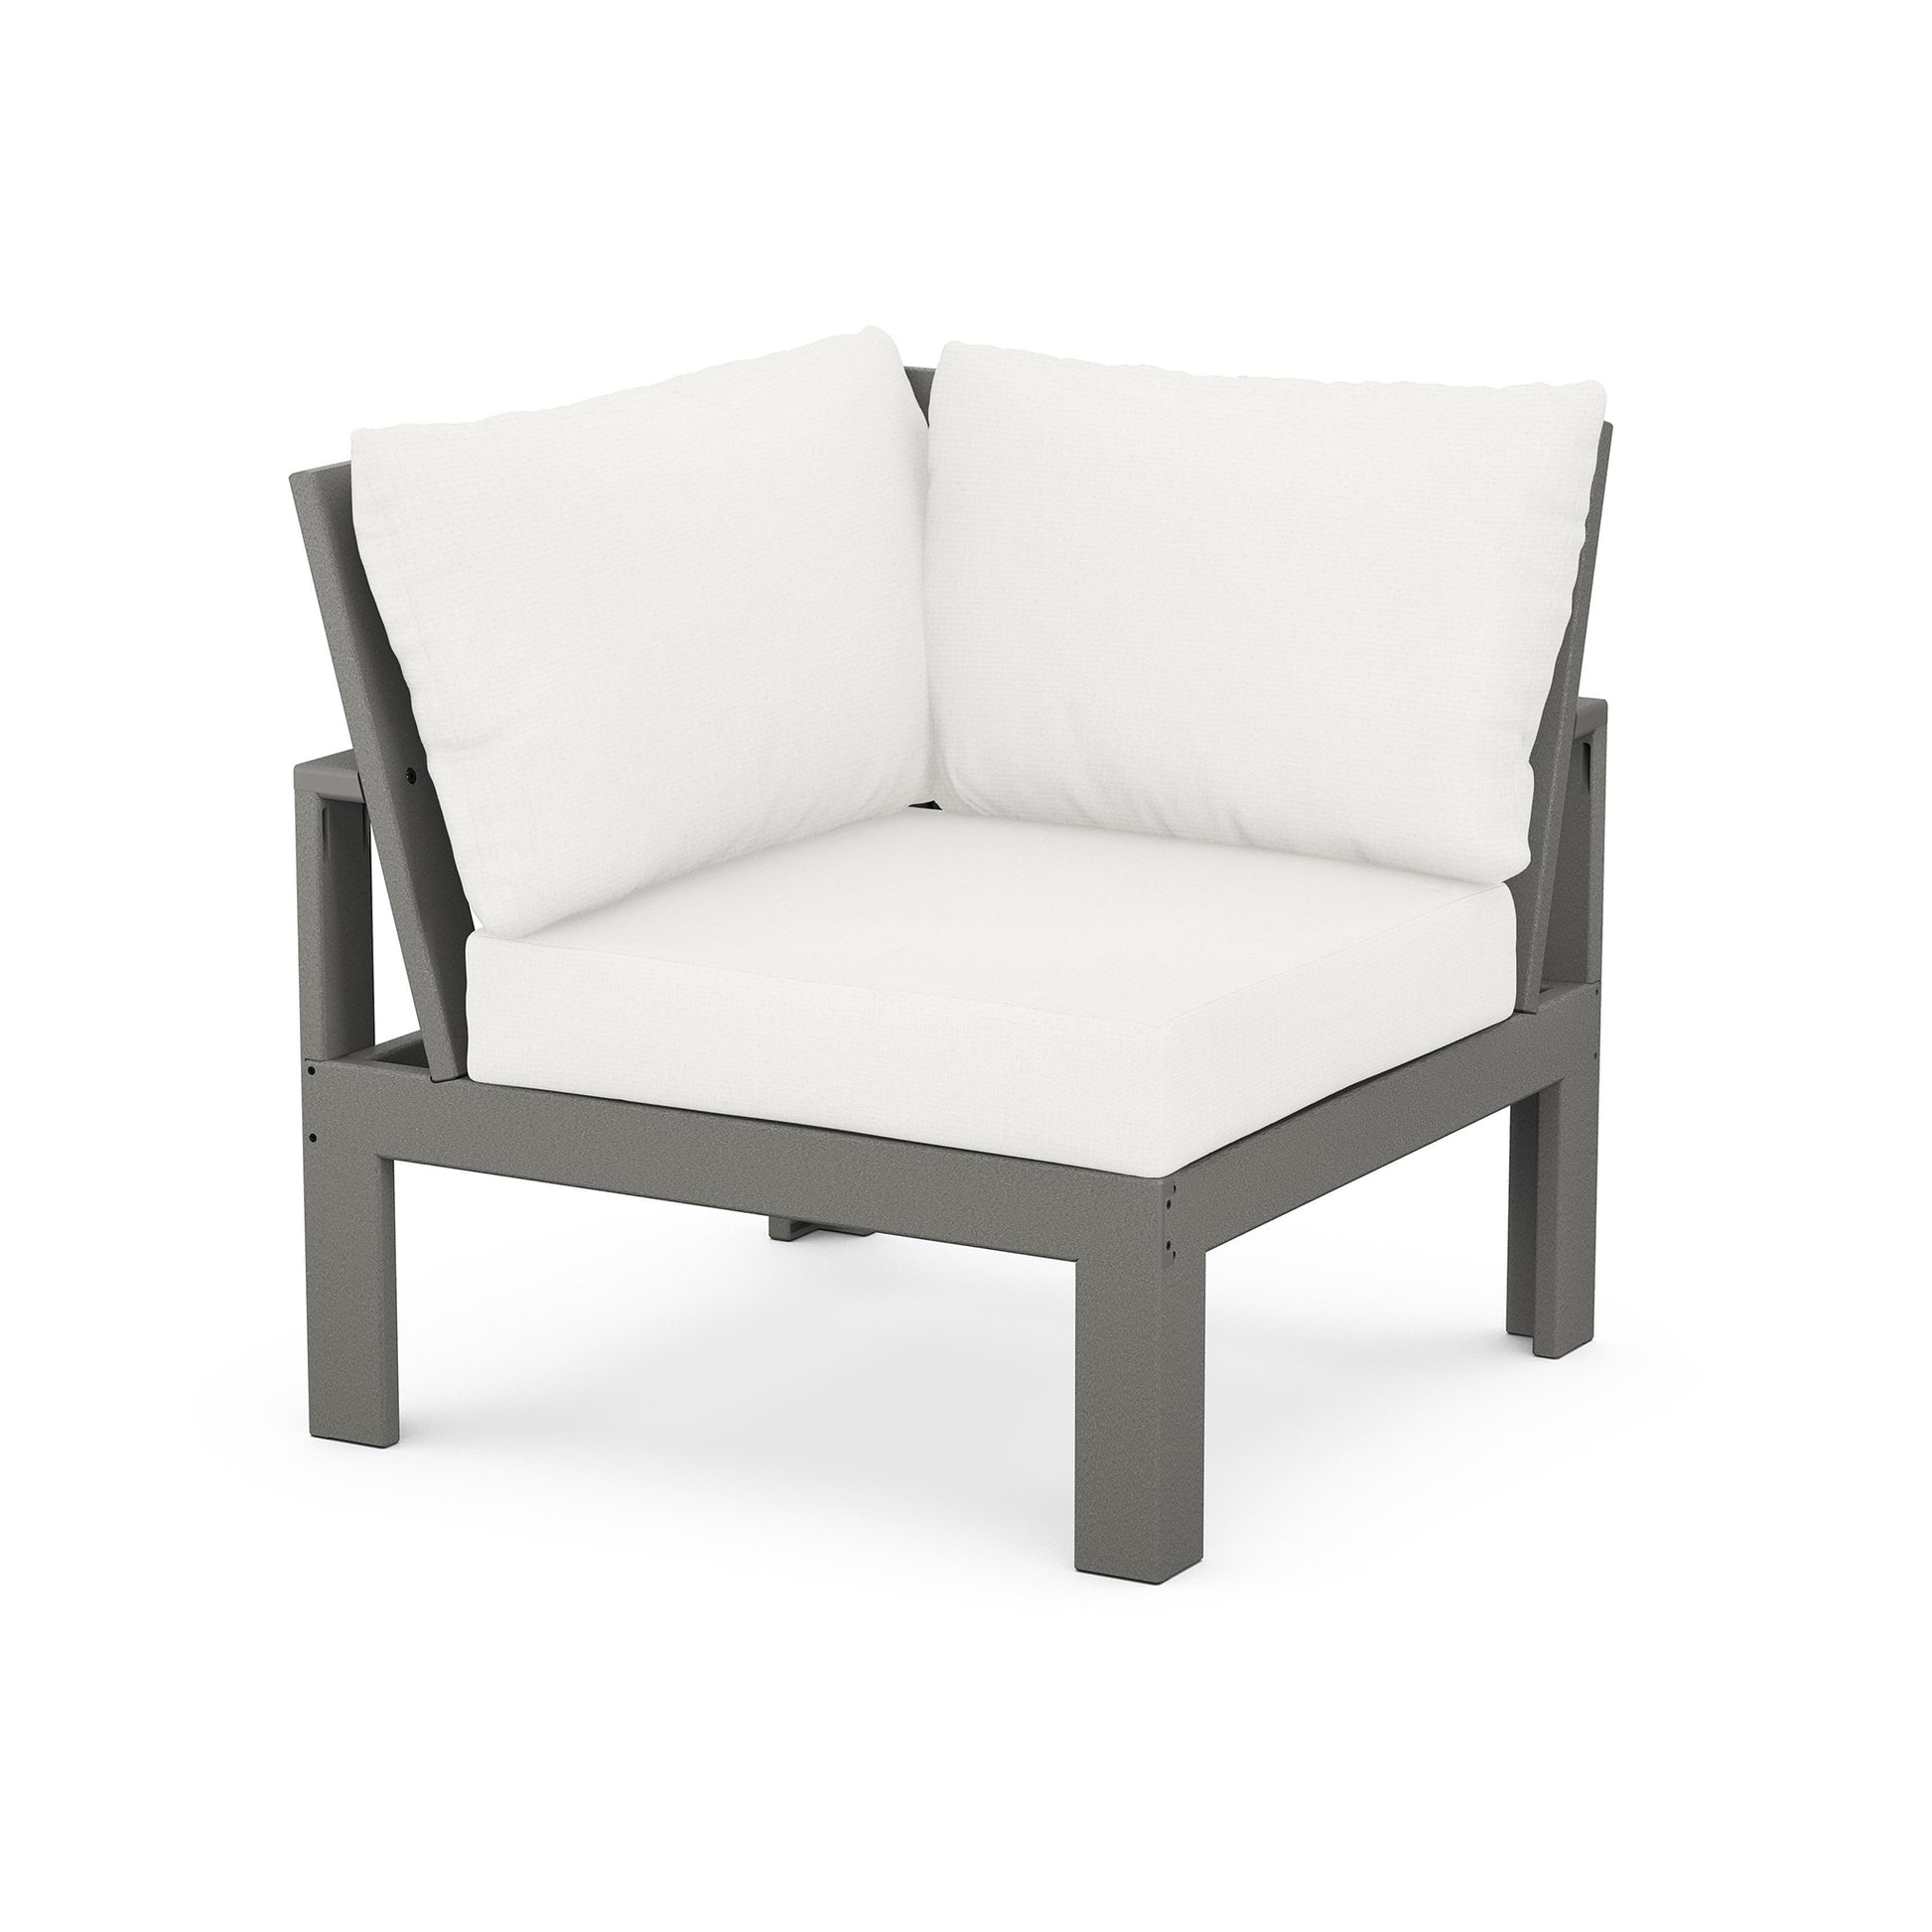 A modern POLYWOOD® Modular Corner Chair with a gray frame and white cushions, isolated on a white background.